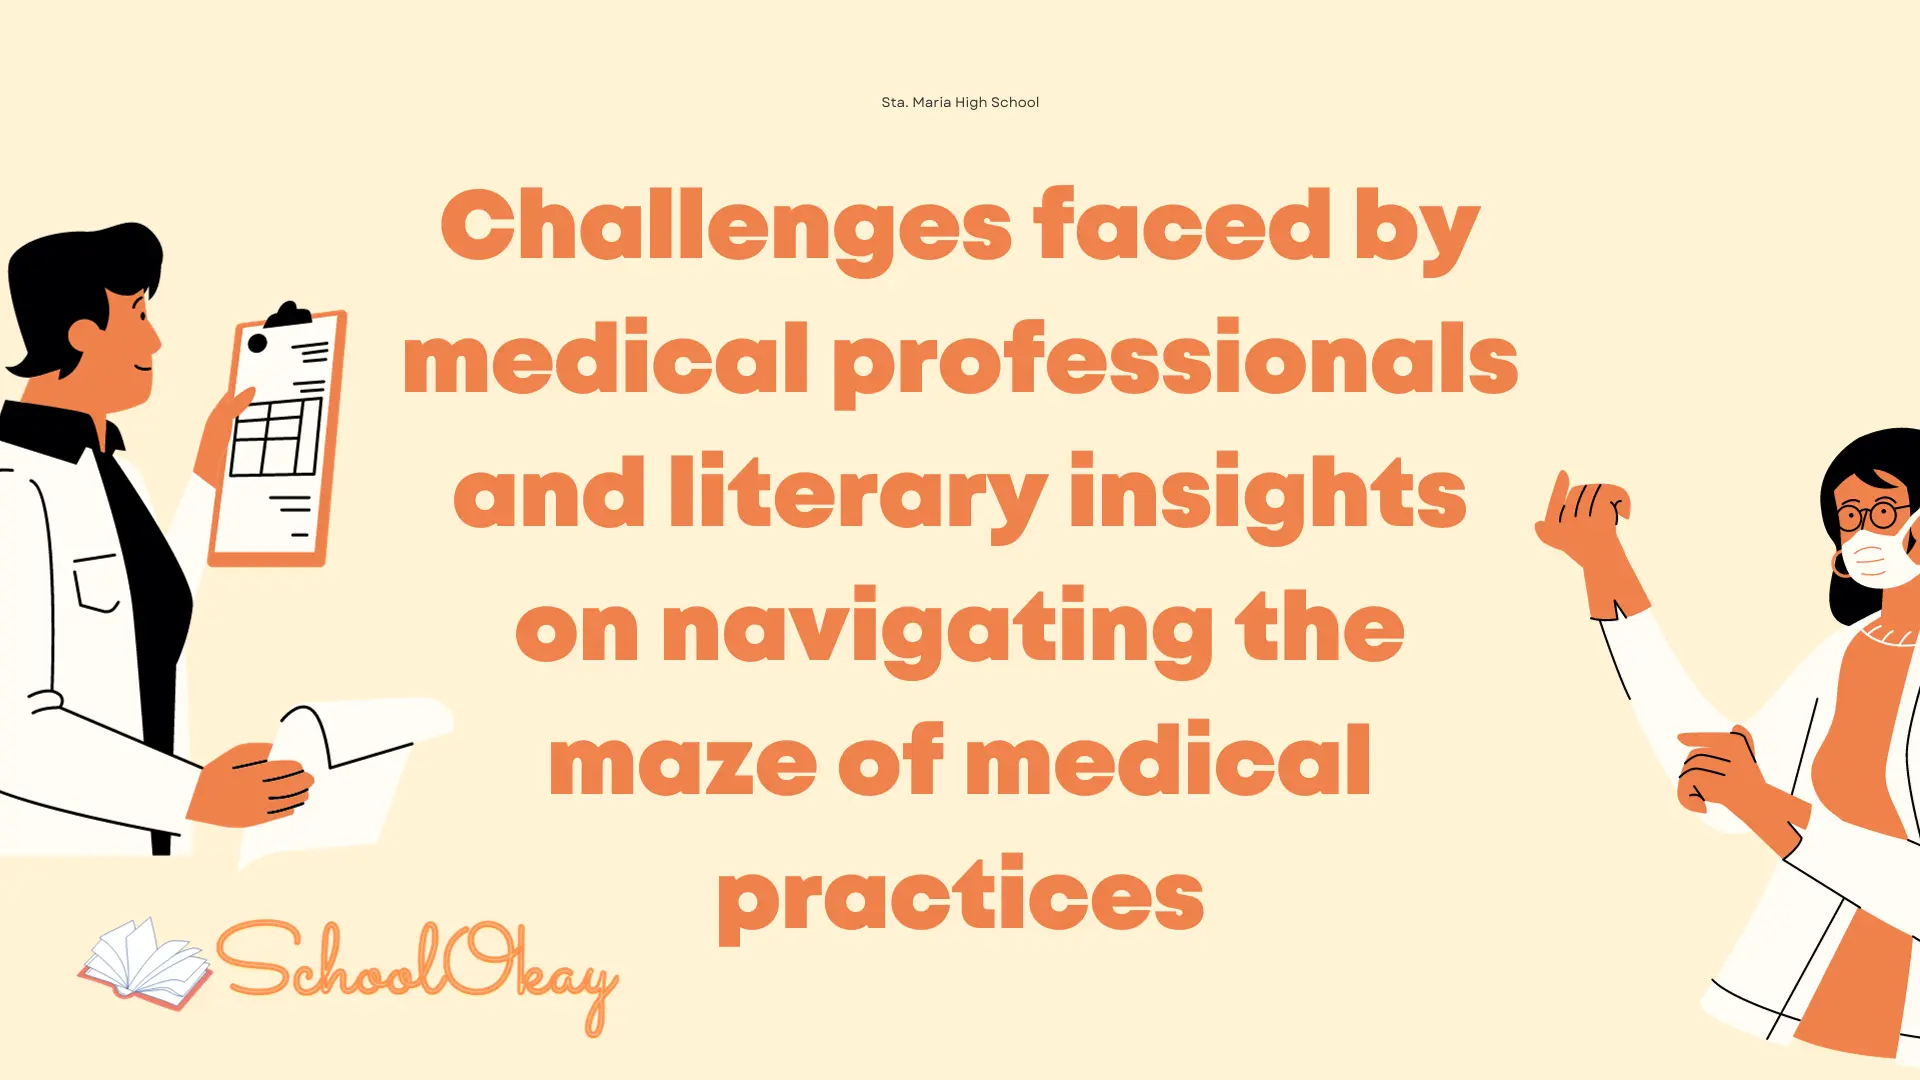 Challenges faced by medical professionals and literary insights on navigating the maze of medical practices